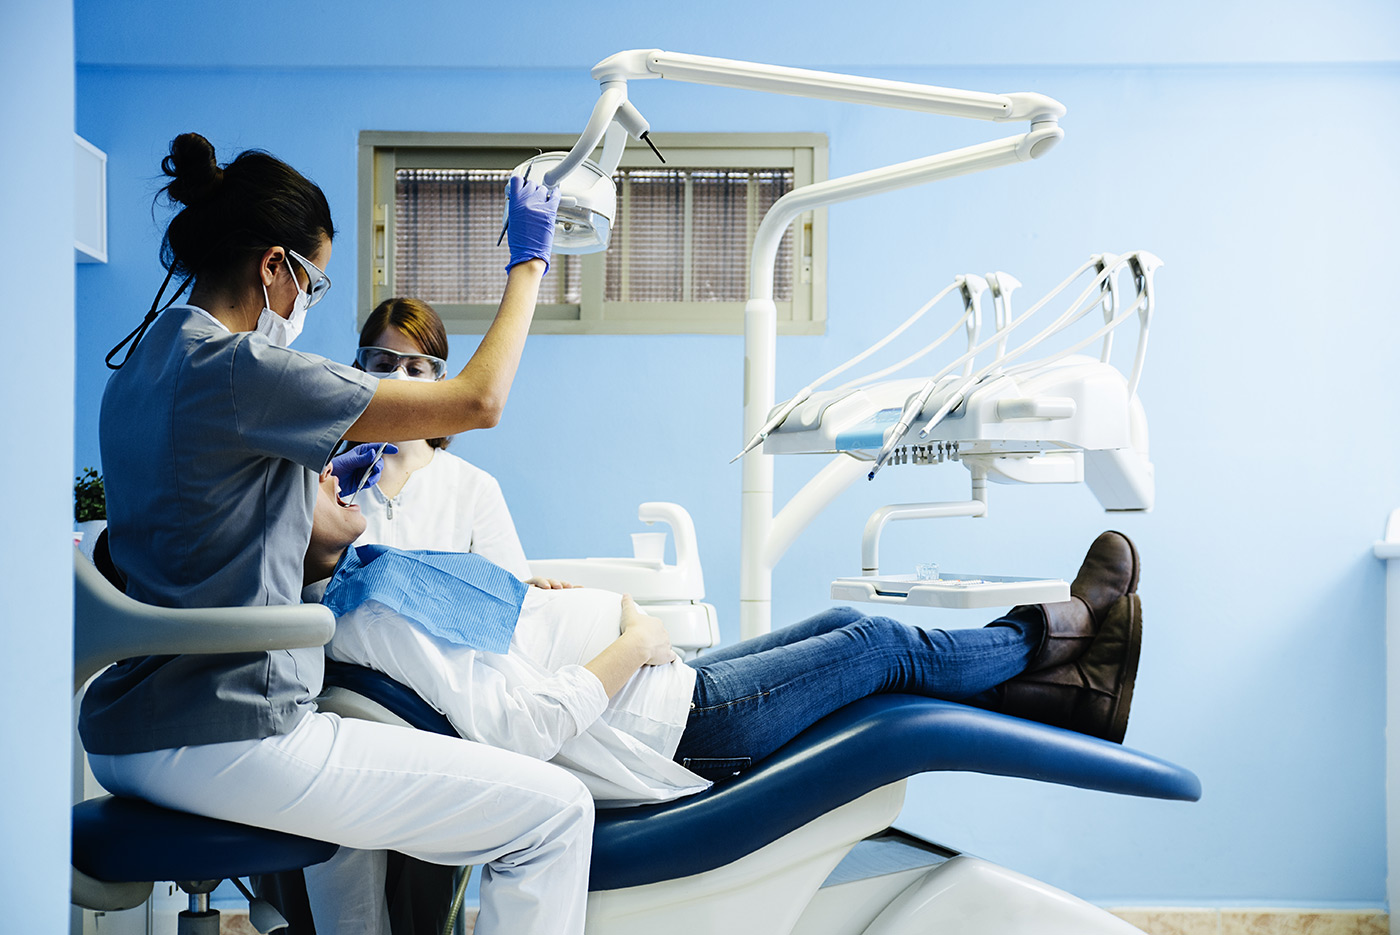 Dentist and assistant performing oral surgery on a patient in a dental chair with dental tools around.